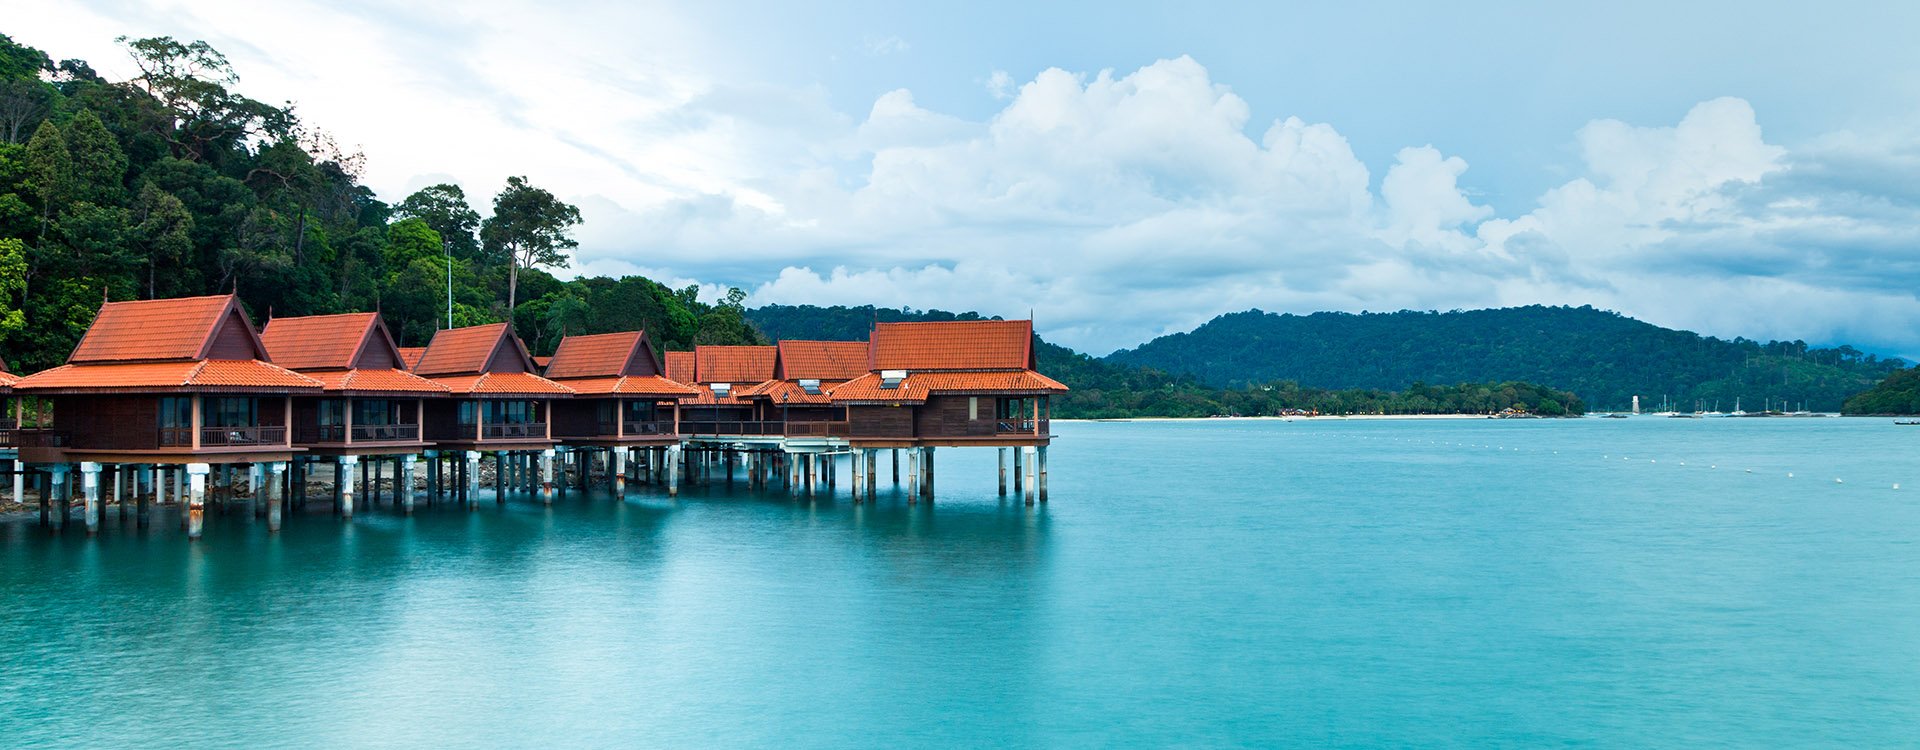 Luxury hotel bungalows on stilts over clear blue water, Langkawi Island, Malaysia